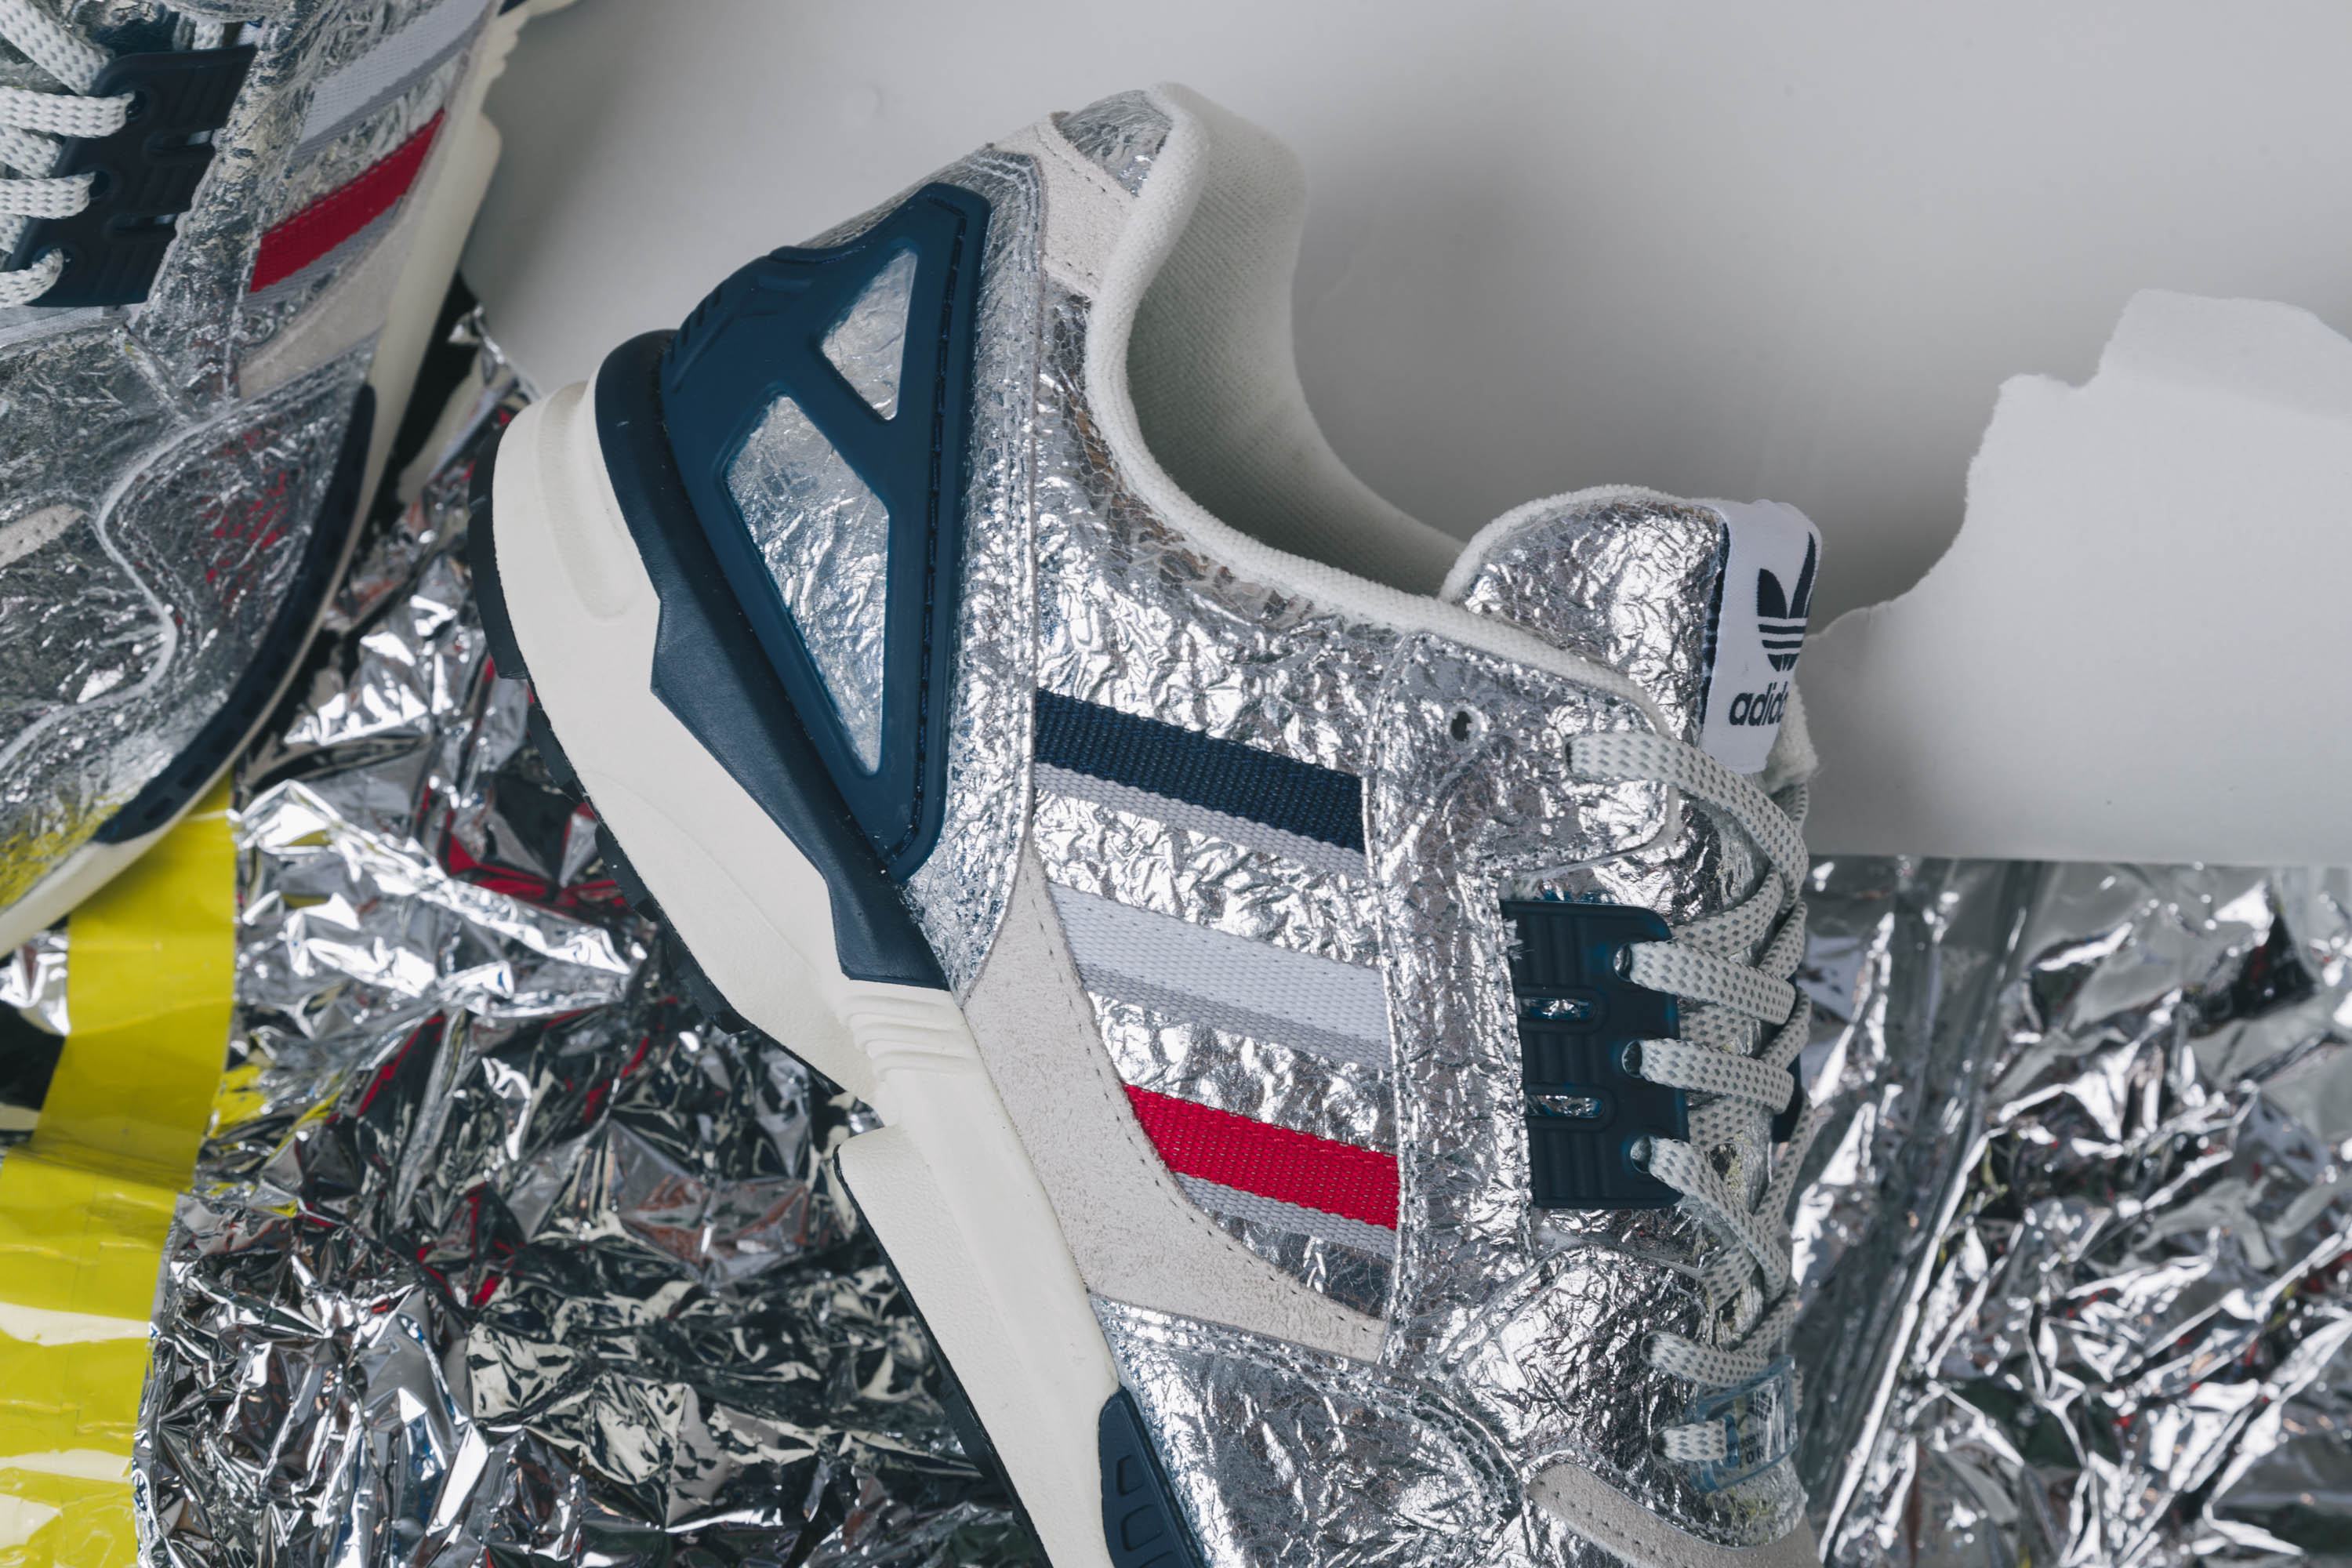 C Is For Concepts: adidas Originals A-ZX ZX 9000 | Up There